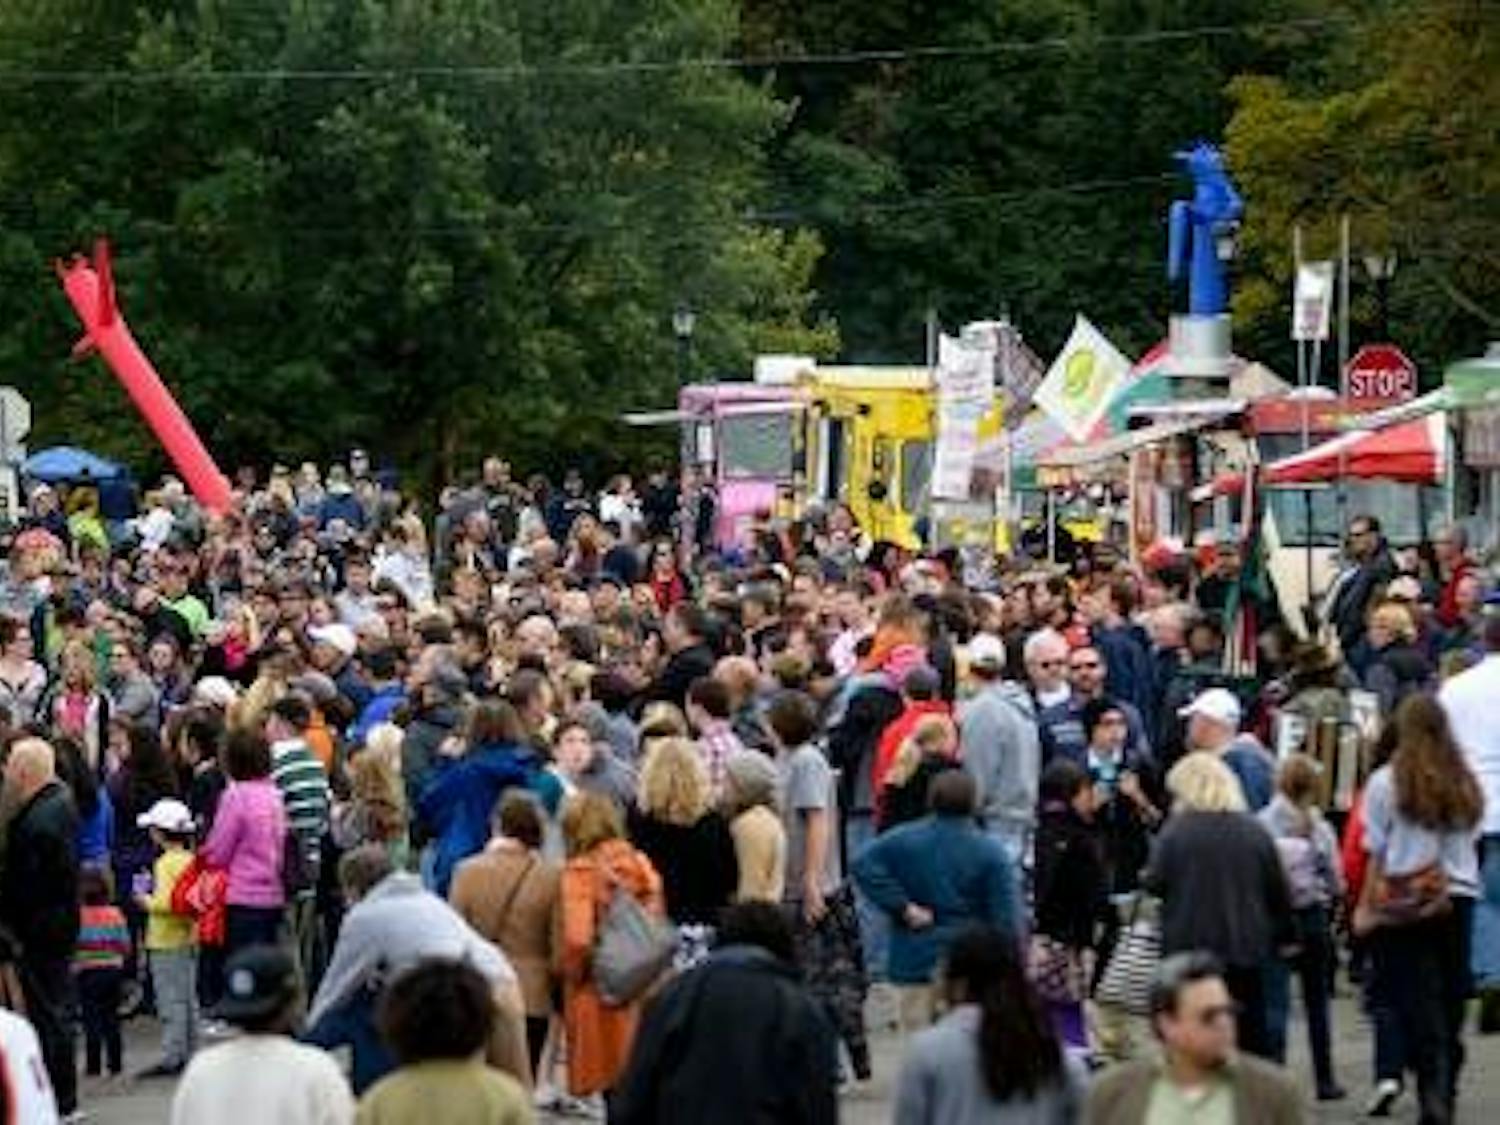 The Music is Art festival started in Buffalo in 2003 and will be held in Delaware Park on Sept. 10.&nbsp;There will be a surplus of food trucks, vendors and activities throughout the entire day.&nbsp;